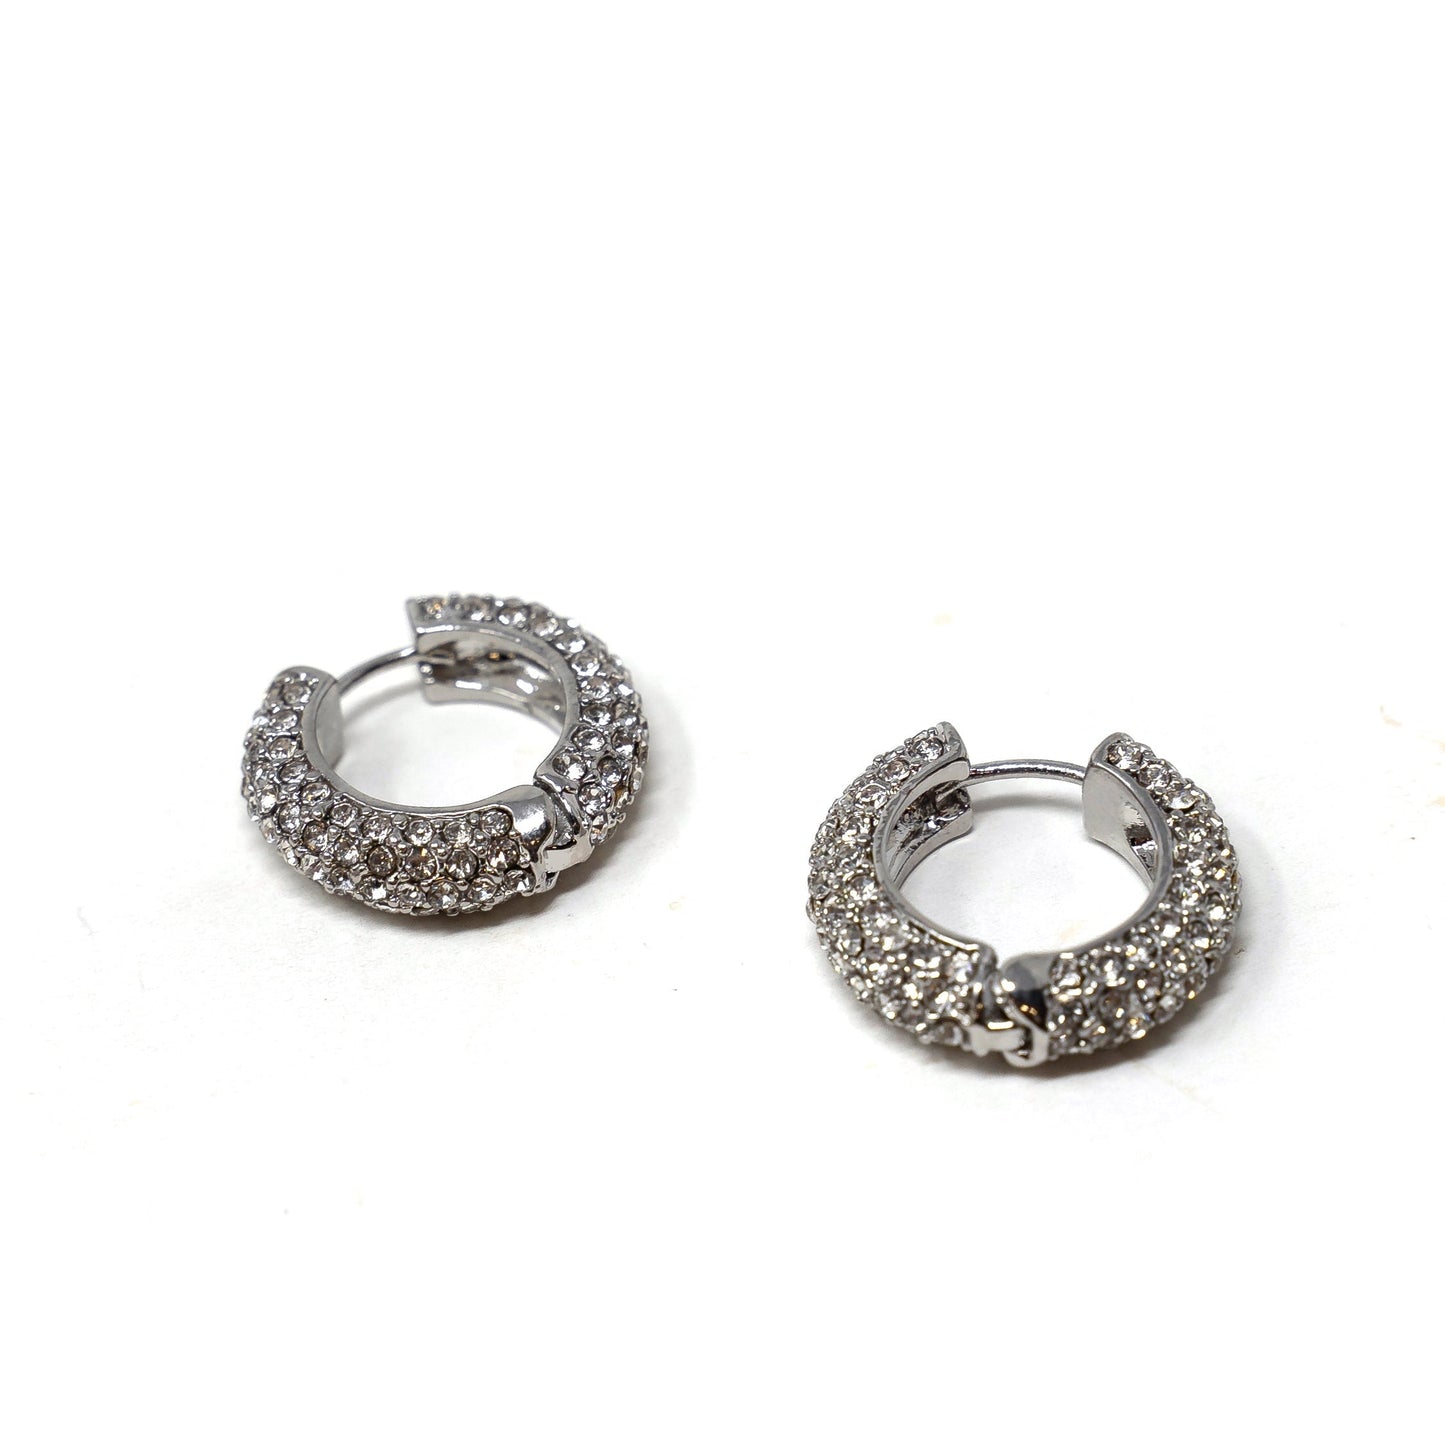 Darling Diva Silver Crystal Hoops JEWELRY The Sis Kiss